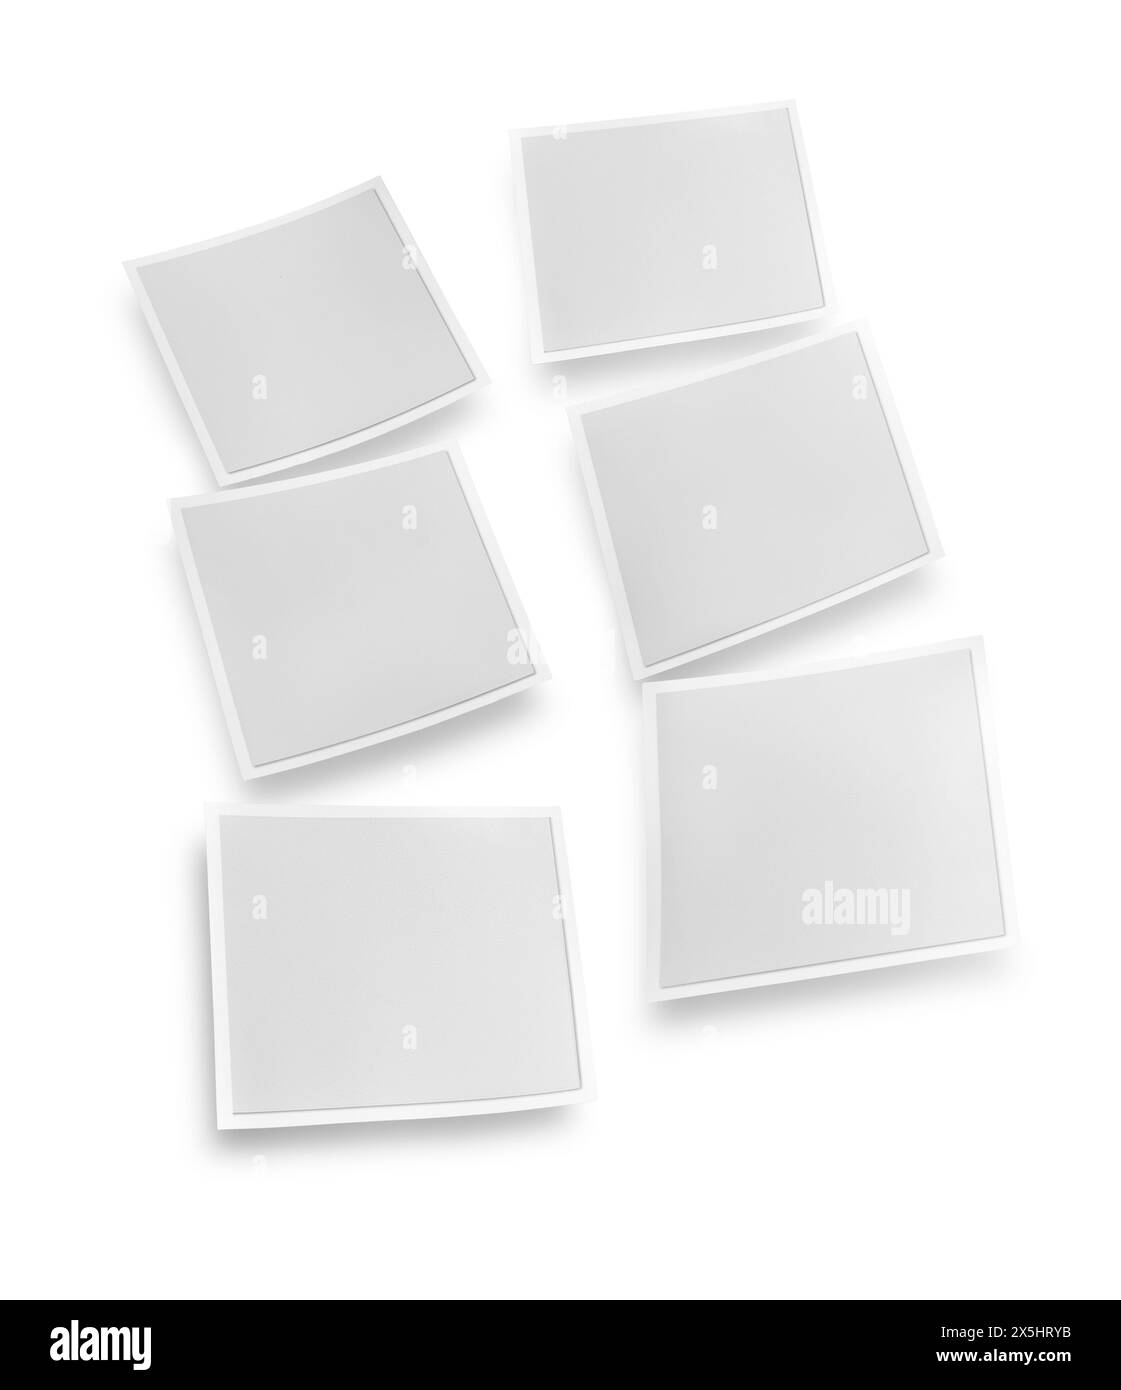 Graphic resource. Six photographic plates with a soft shadow against white background. Clipping path on plates and inside plates. Stock Photo